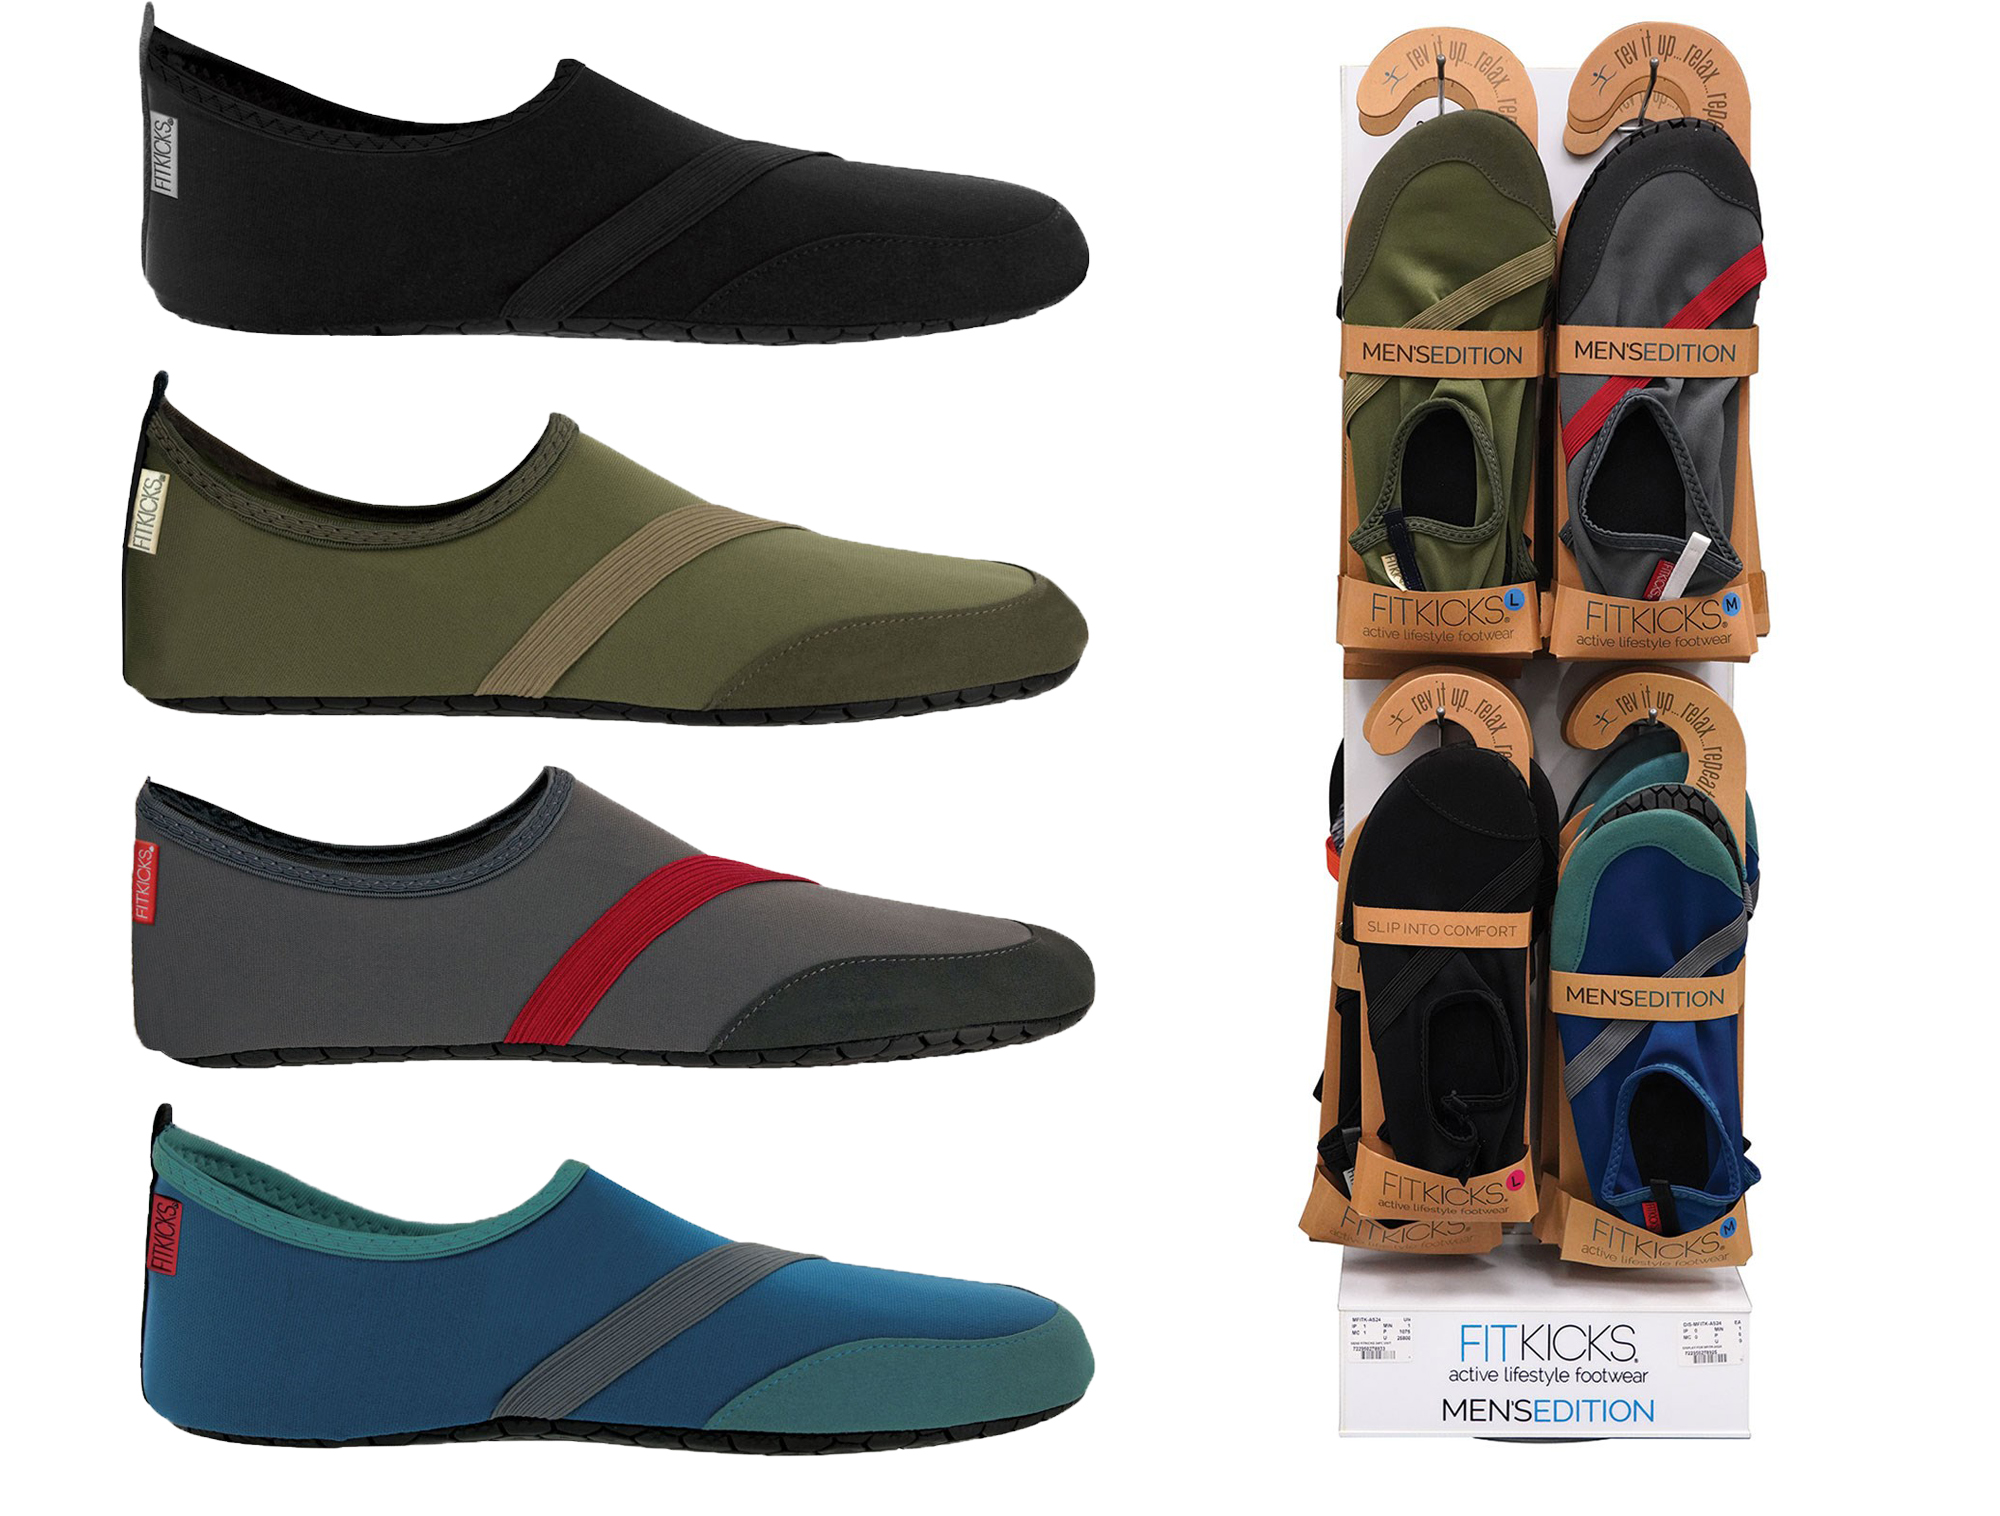 Men's FitKicks Slip-On Athletic SHOES w/ Two Tone Colors & Soft Footbed